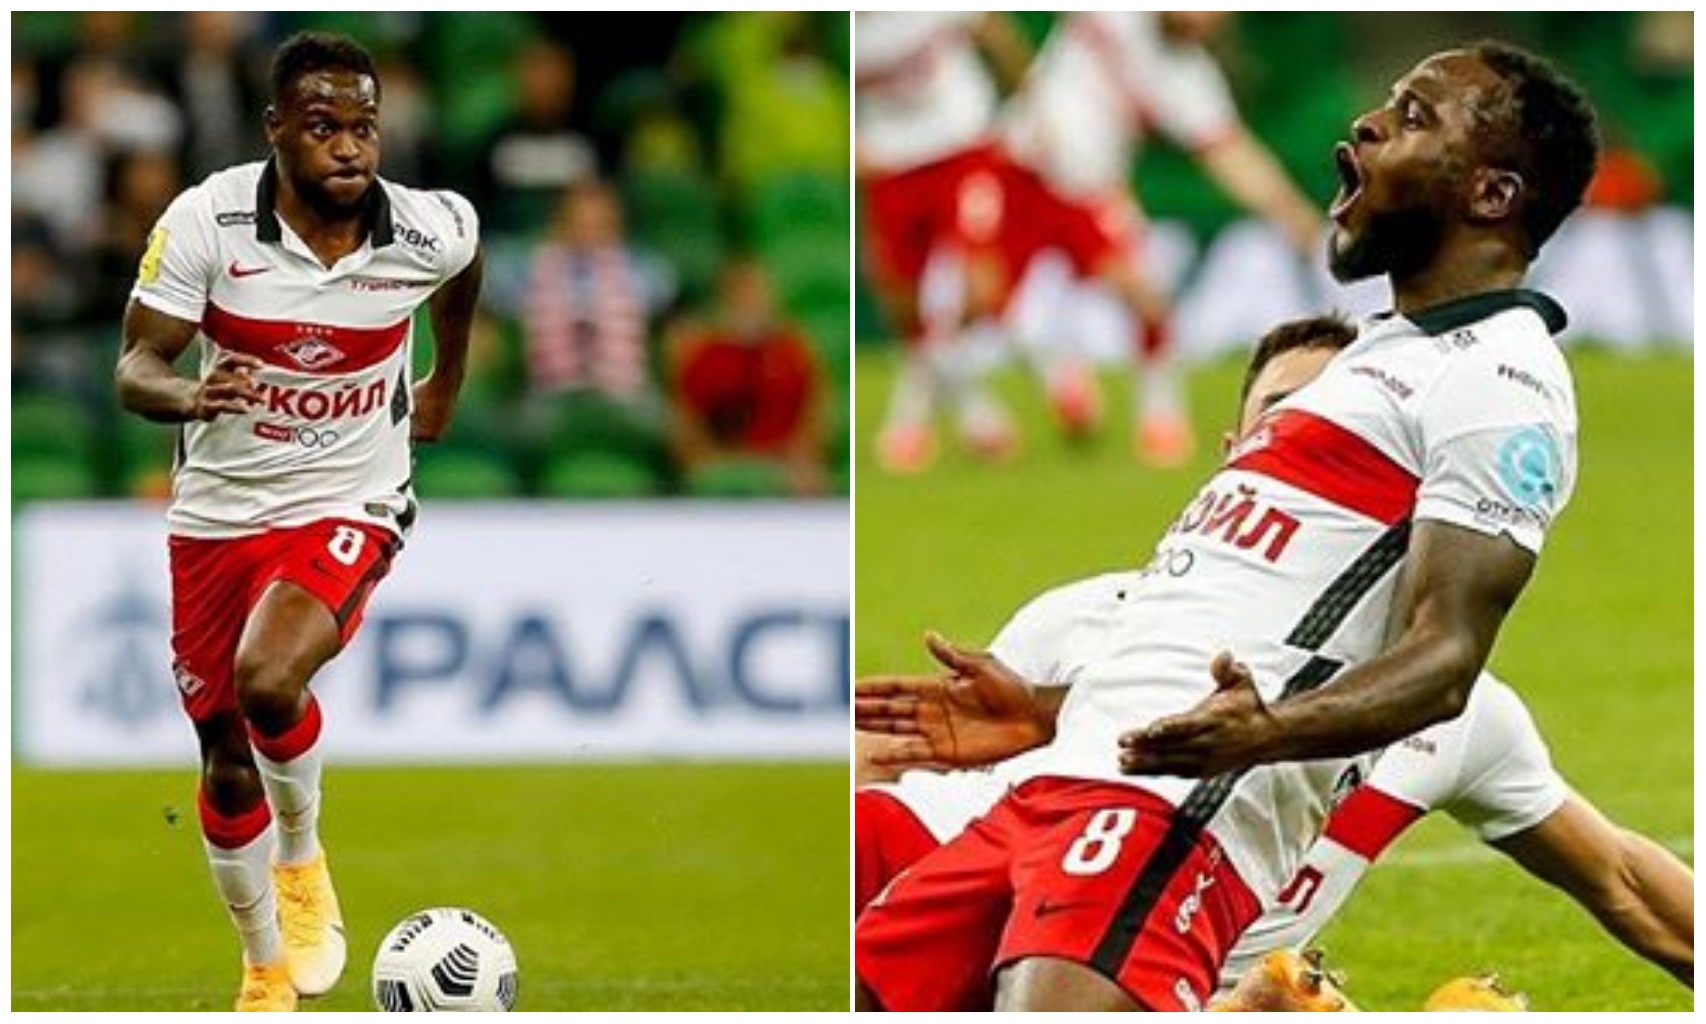 Victor Moses dedicates first Spartak Moscow goal to Nigeria Citizens amidst EndSars movement